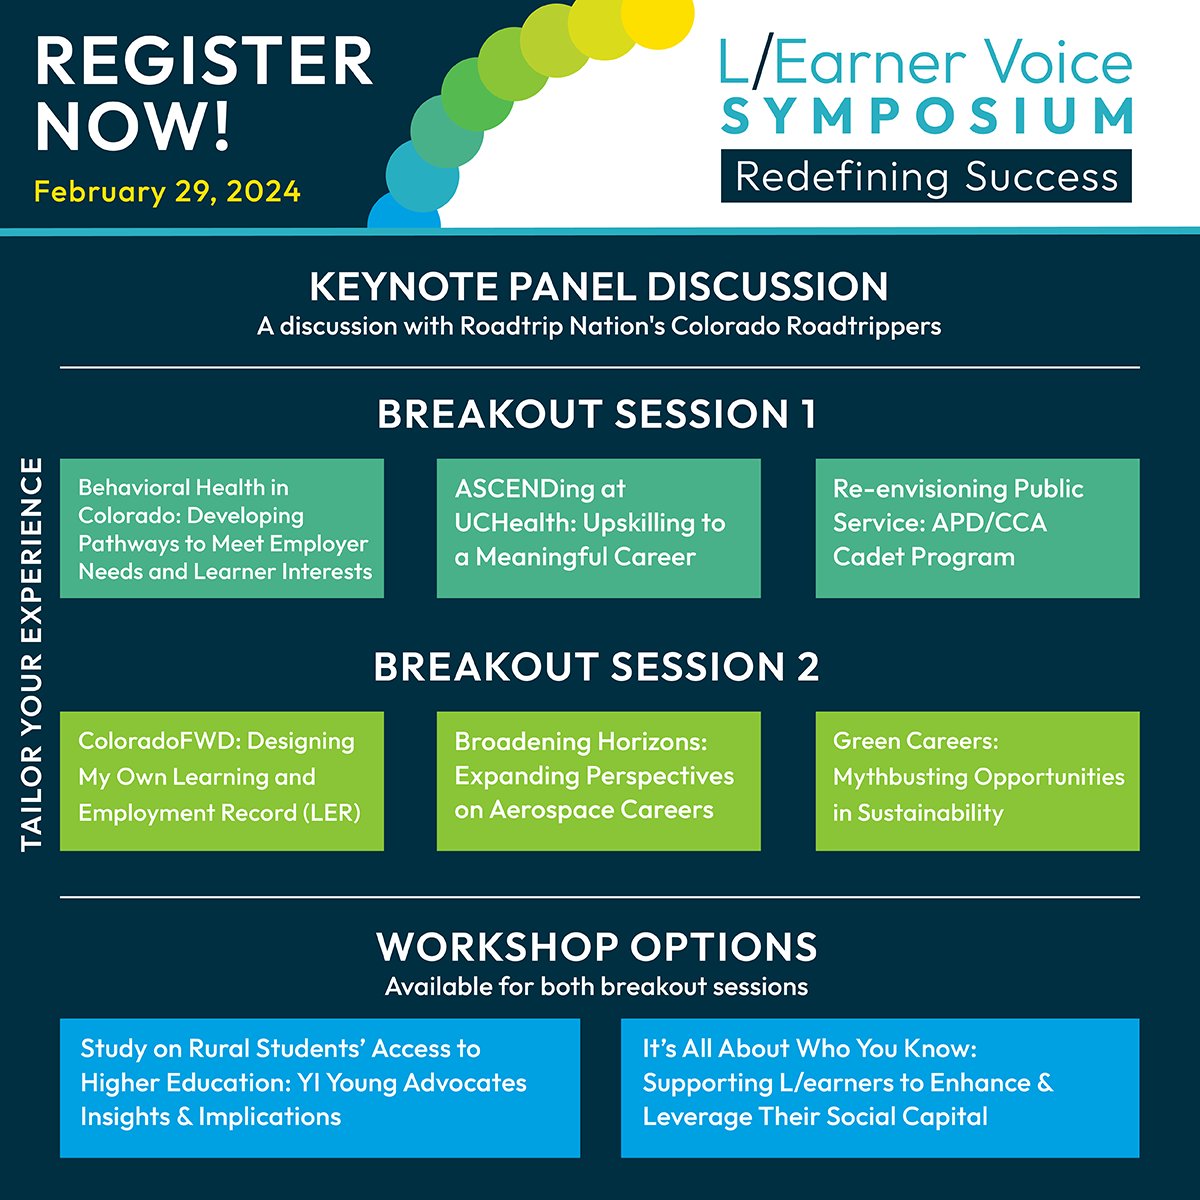 Only 2 weeks to our free, virtual 2024 L/Earner Voice Symposium. With a keynote from @RoadtripNation’s Colorado Roadtrippers & 2 rounds of breakouts with workshops and discussions to choose your own path! Secure your spot now! bit.ly/lvs2024 @the_cwdc @LuminaFound